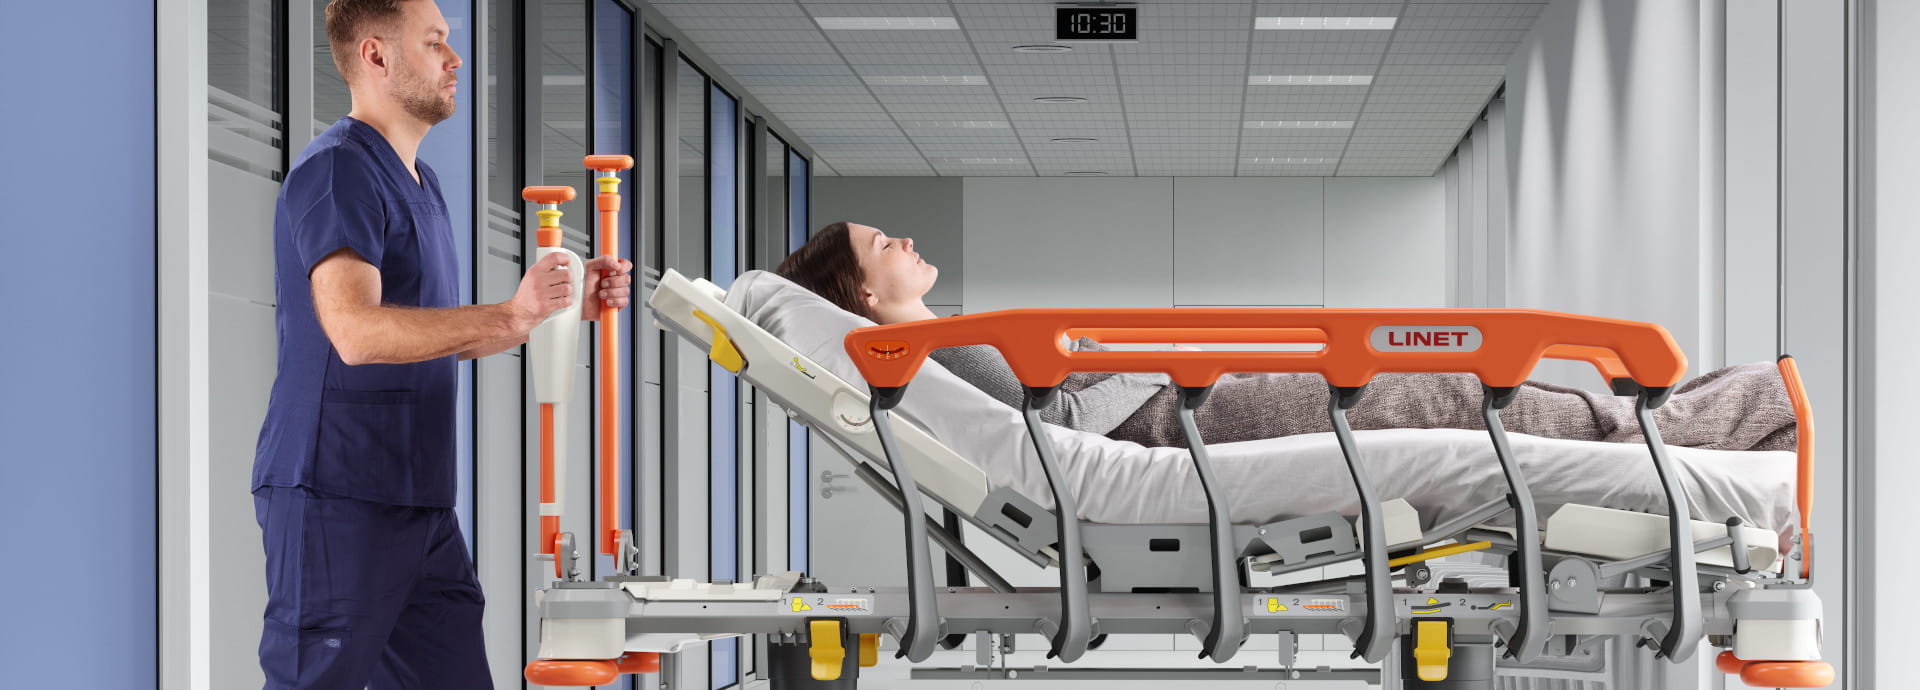 The new sprint 200 - Safety proven in millions of hospital beds, transferred to a stretcher